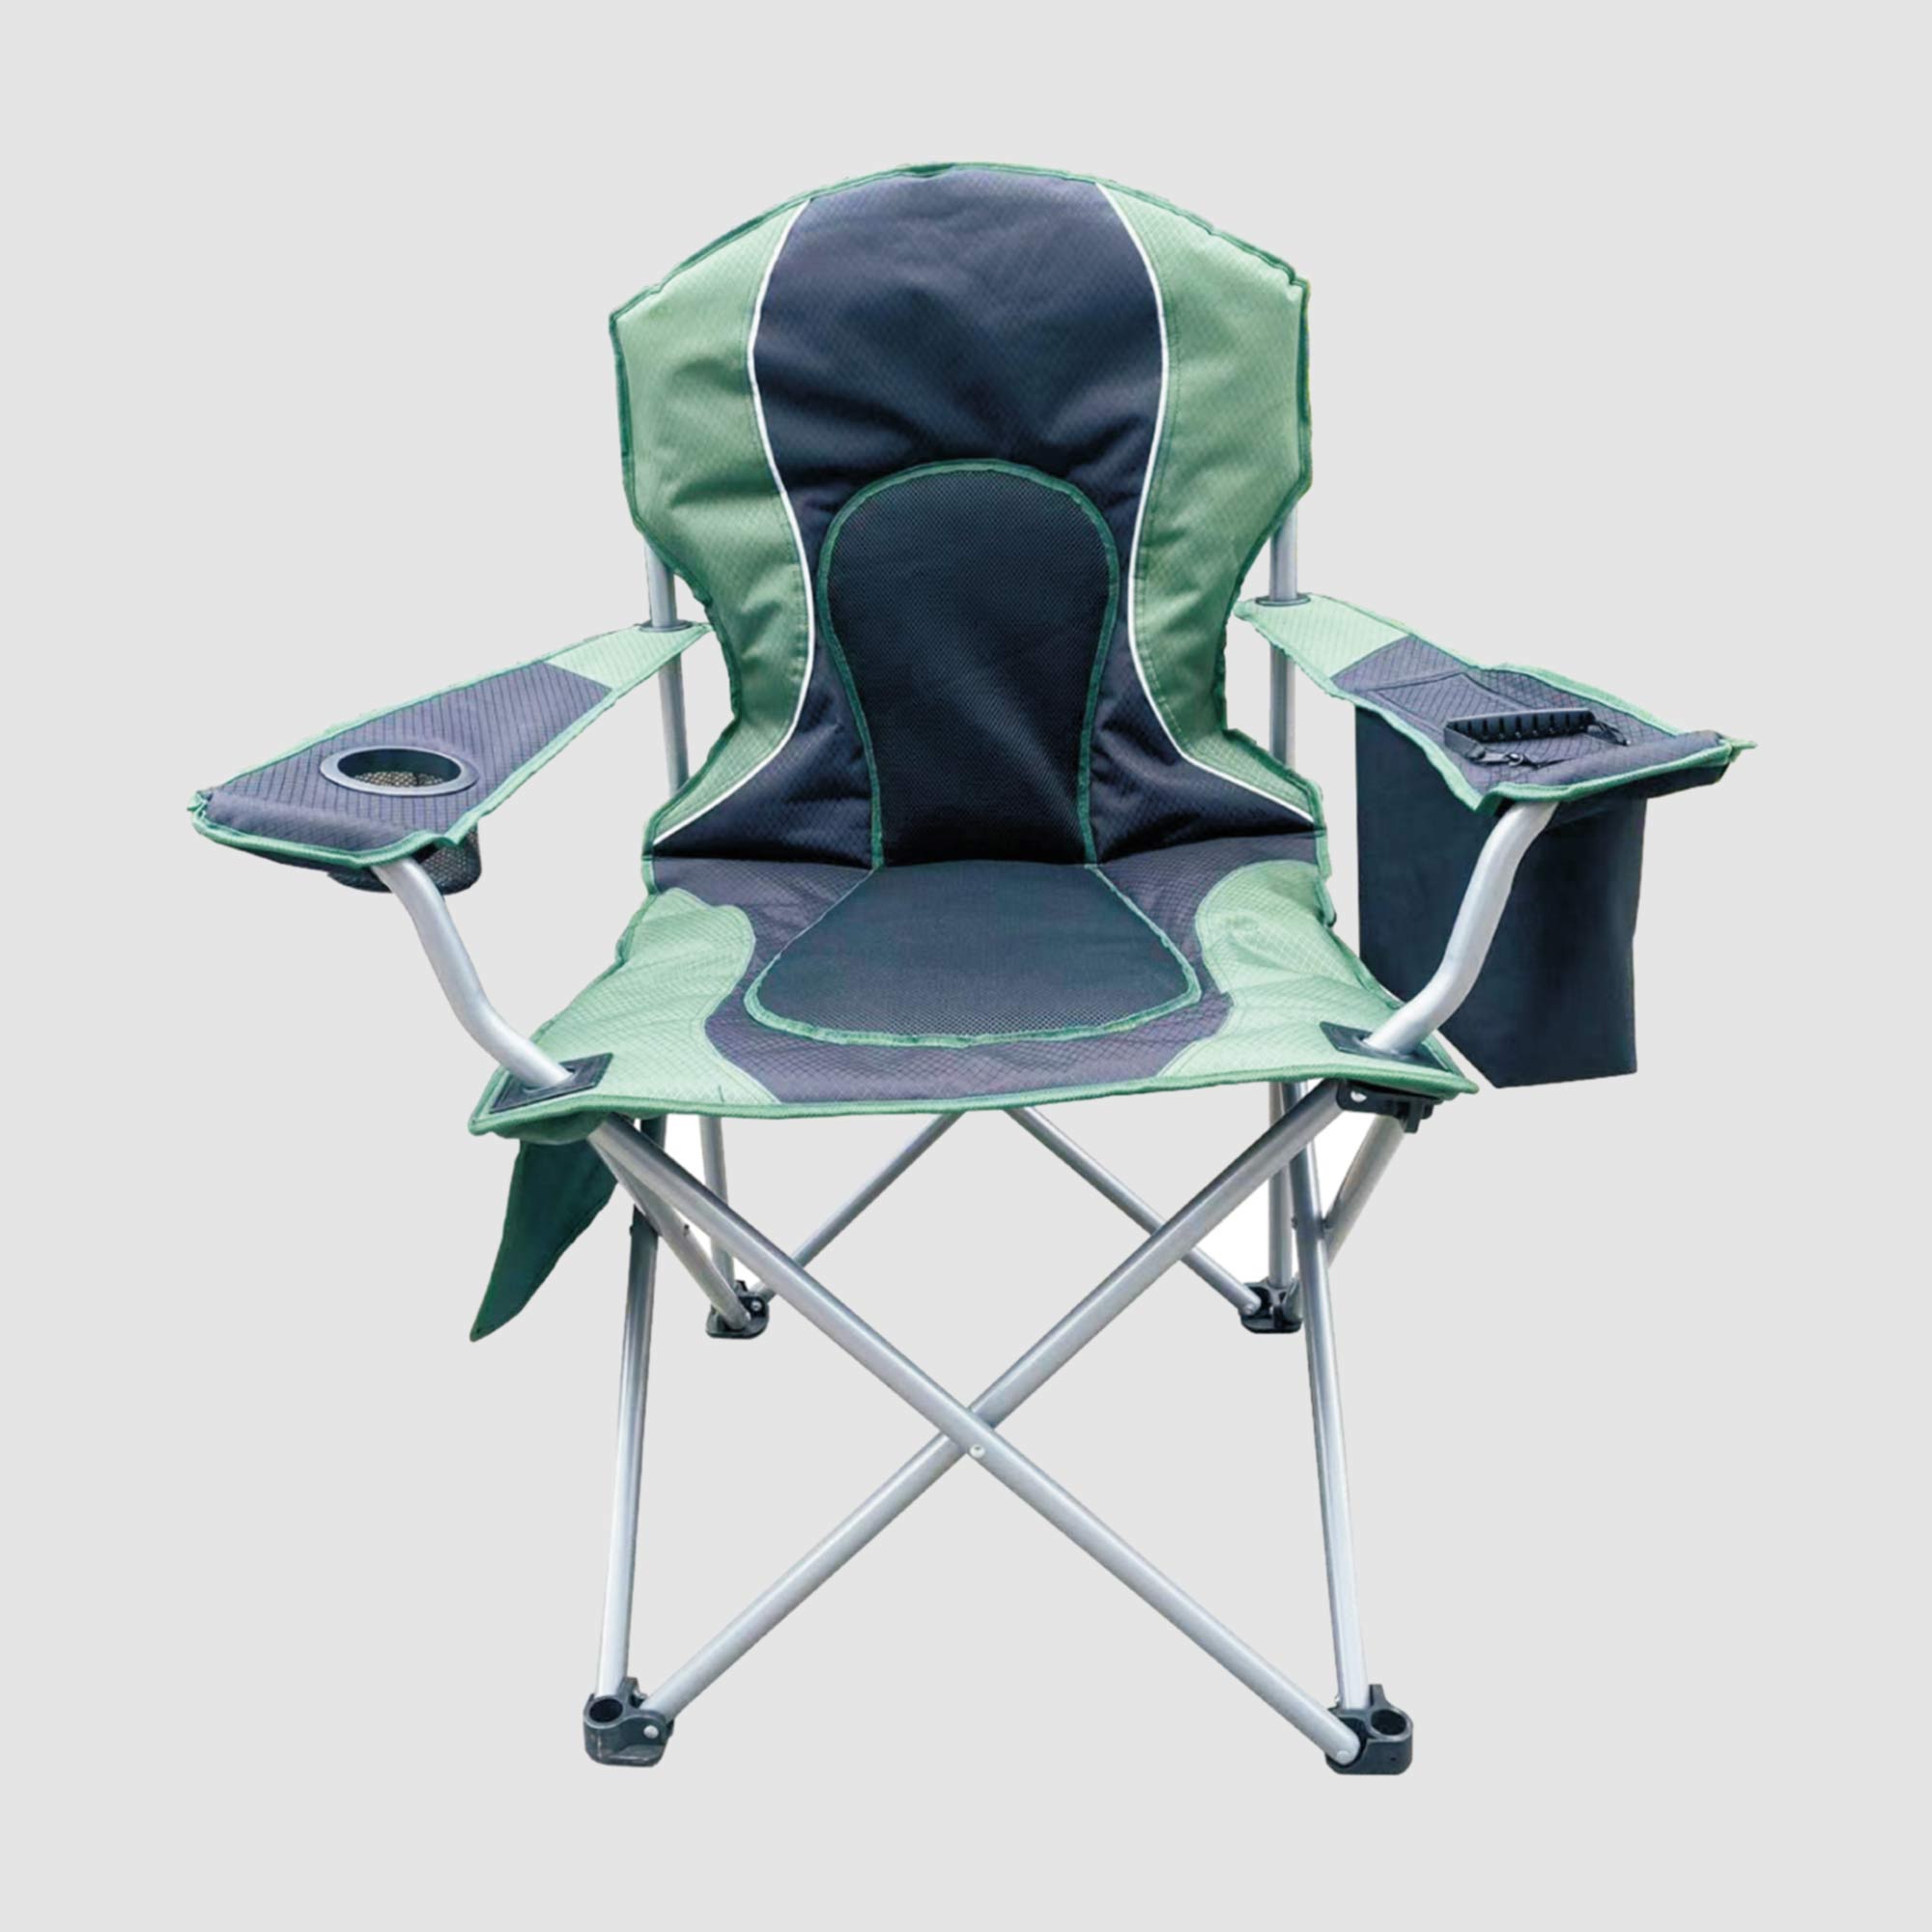 Outdoor Creations Deluxe Camping Chair W/Cooler Bag Green/Bl